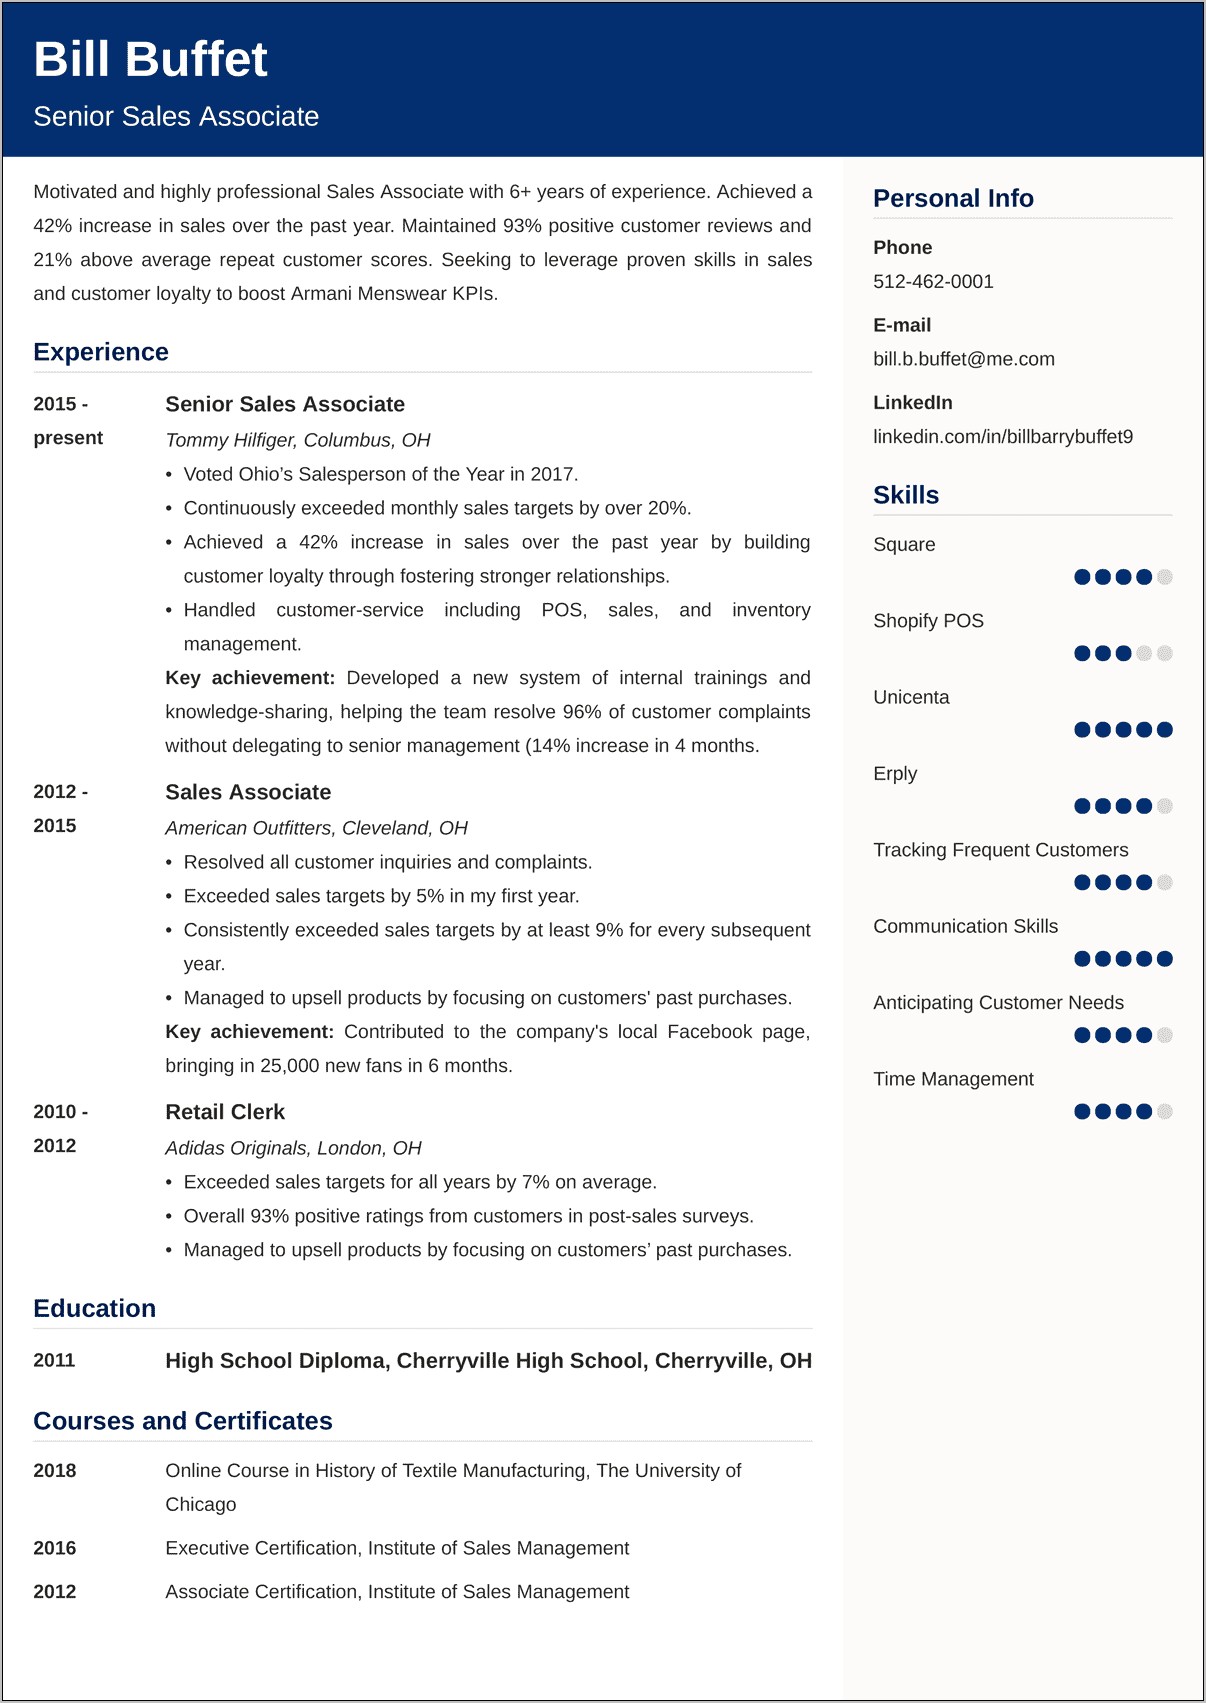 Resume Description Goodwill Store Sales Manages